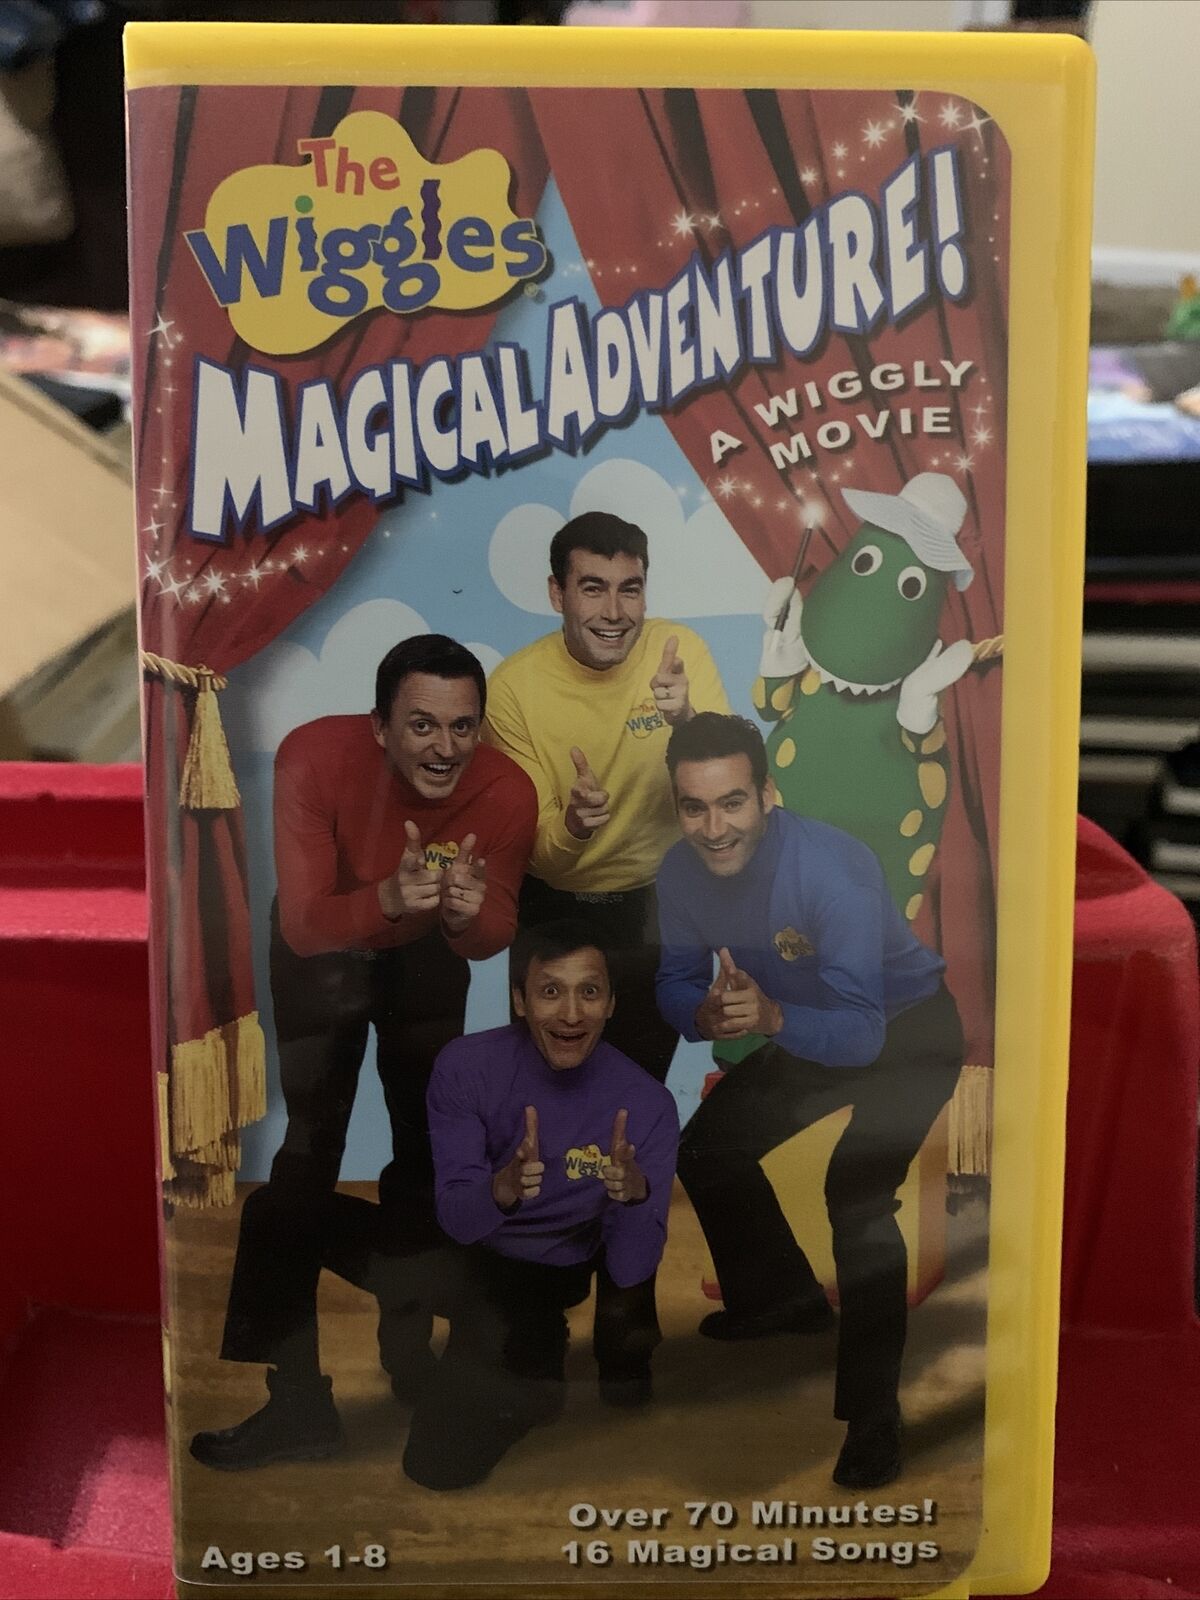 The Wiggles Magical Adventure A Wiggly Movie VHS Tape 2002 Yellow Clamshell HTF